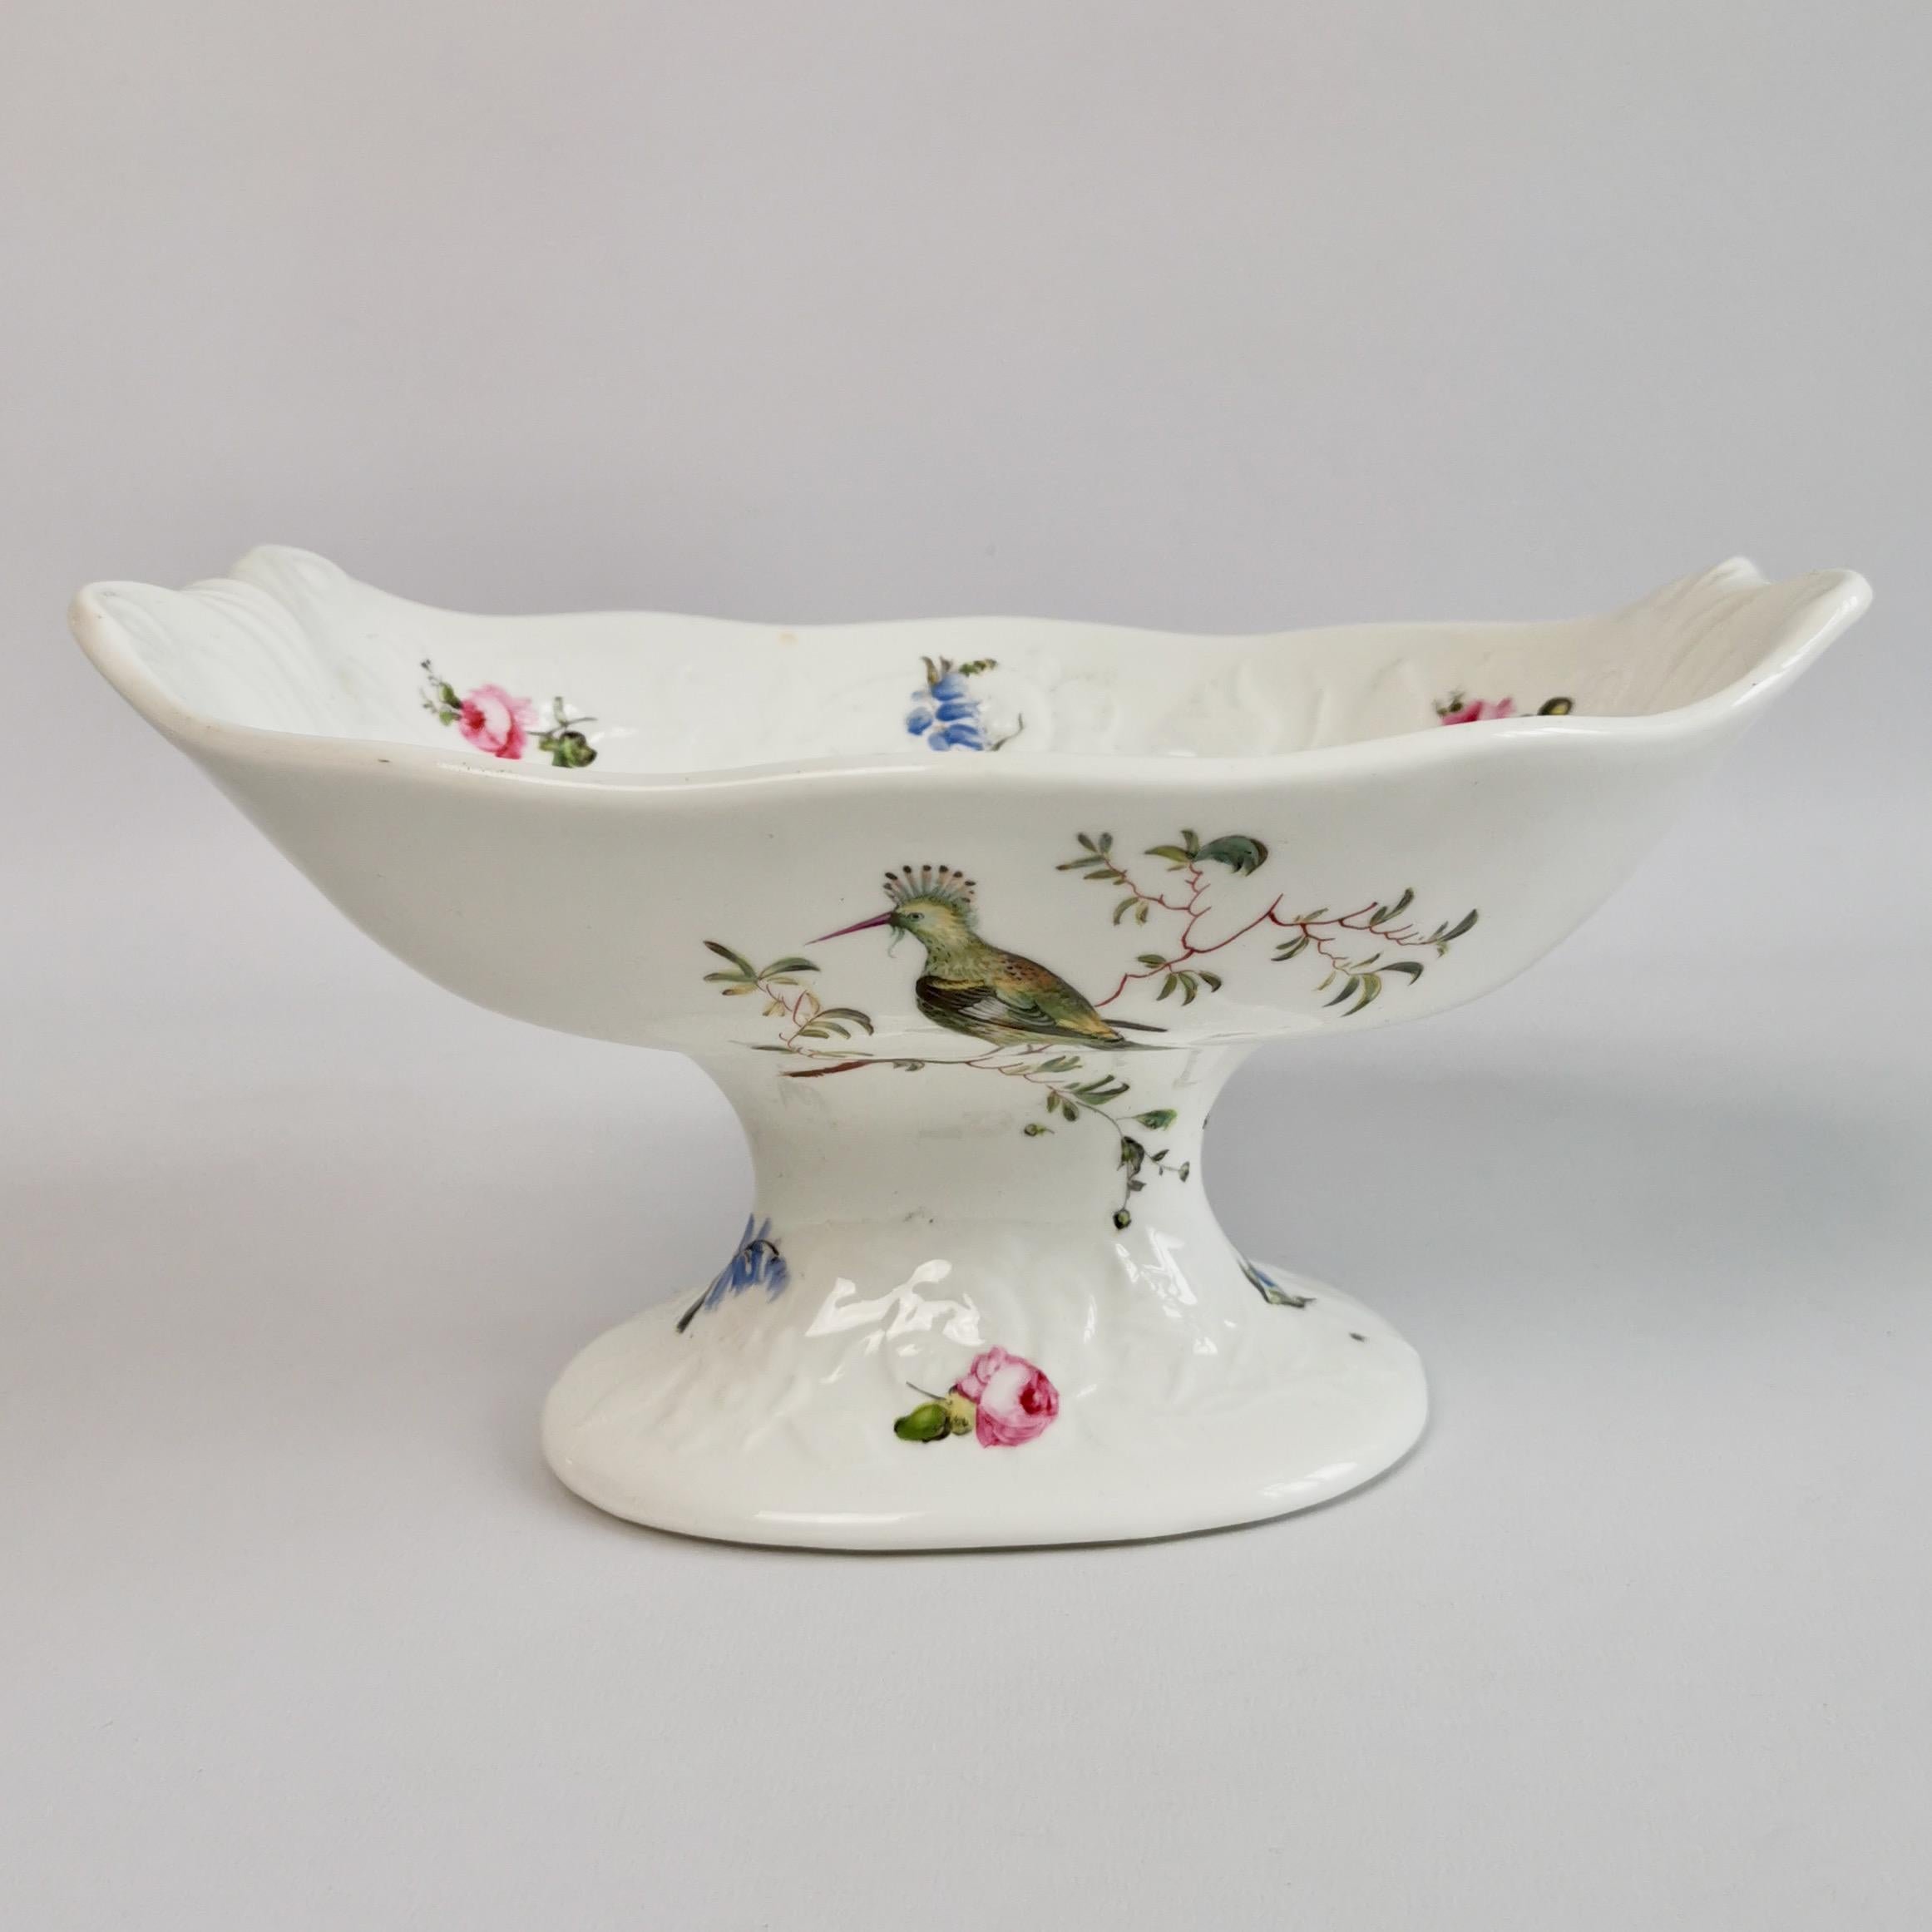 Hand-Painted Mayer & Newbold Porcelain Comport, White with Exotic Birds, Regency, ca 1820